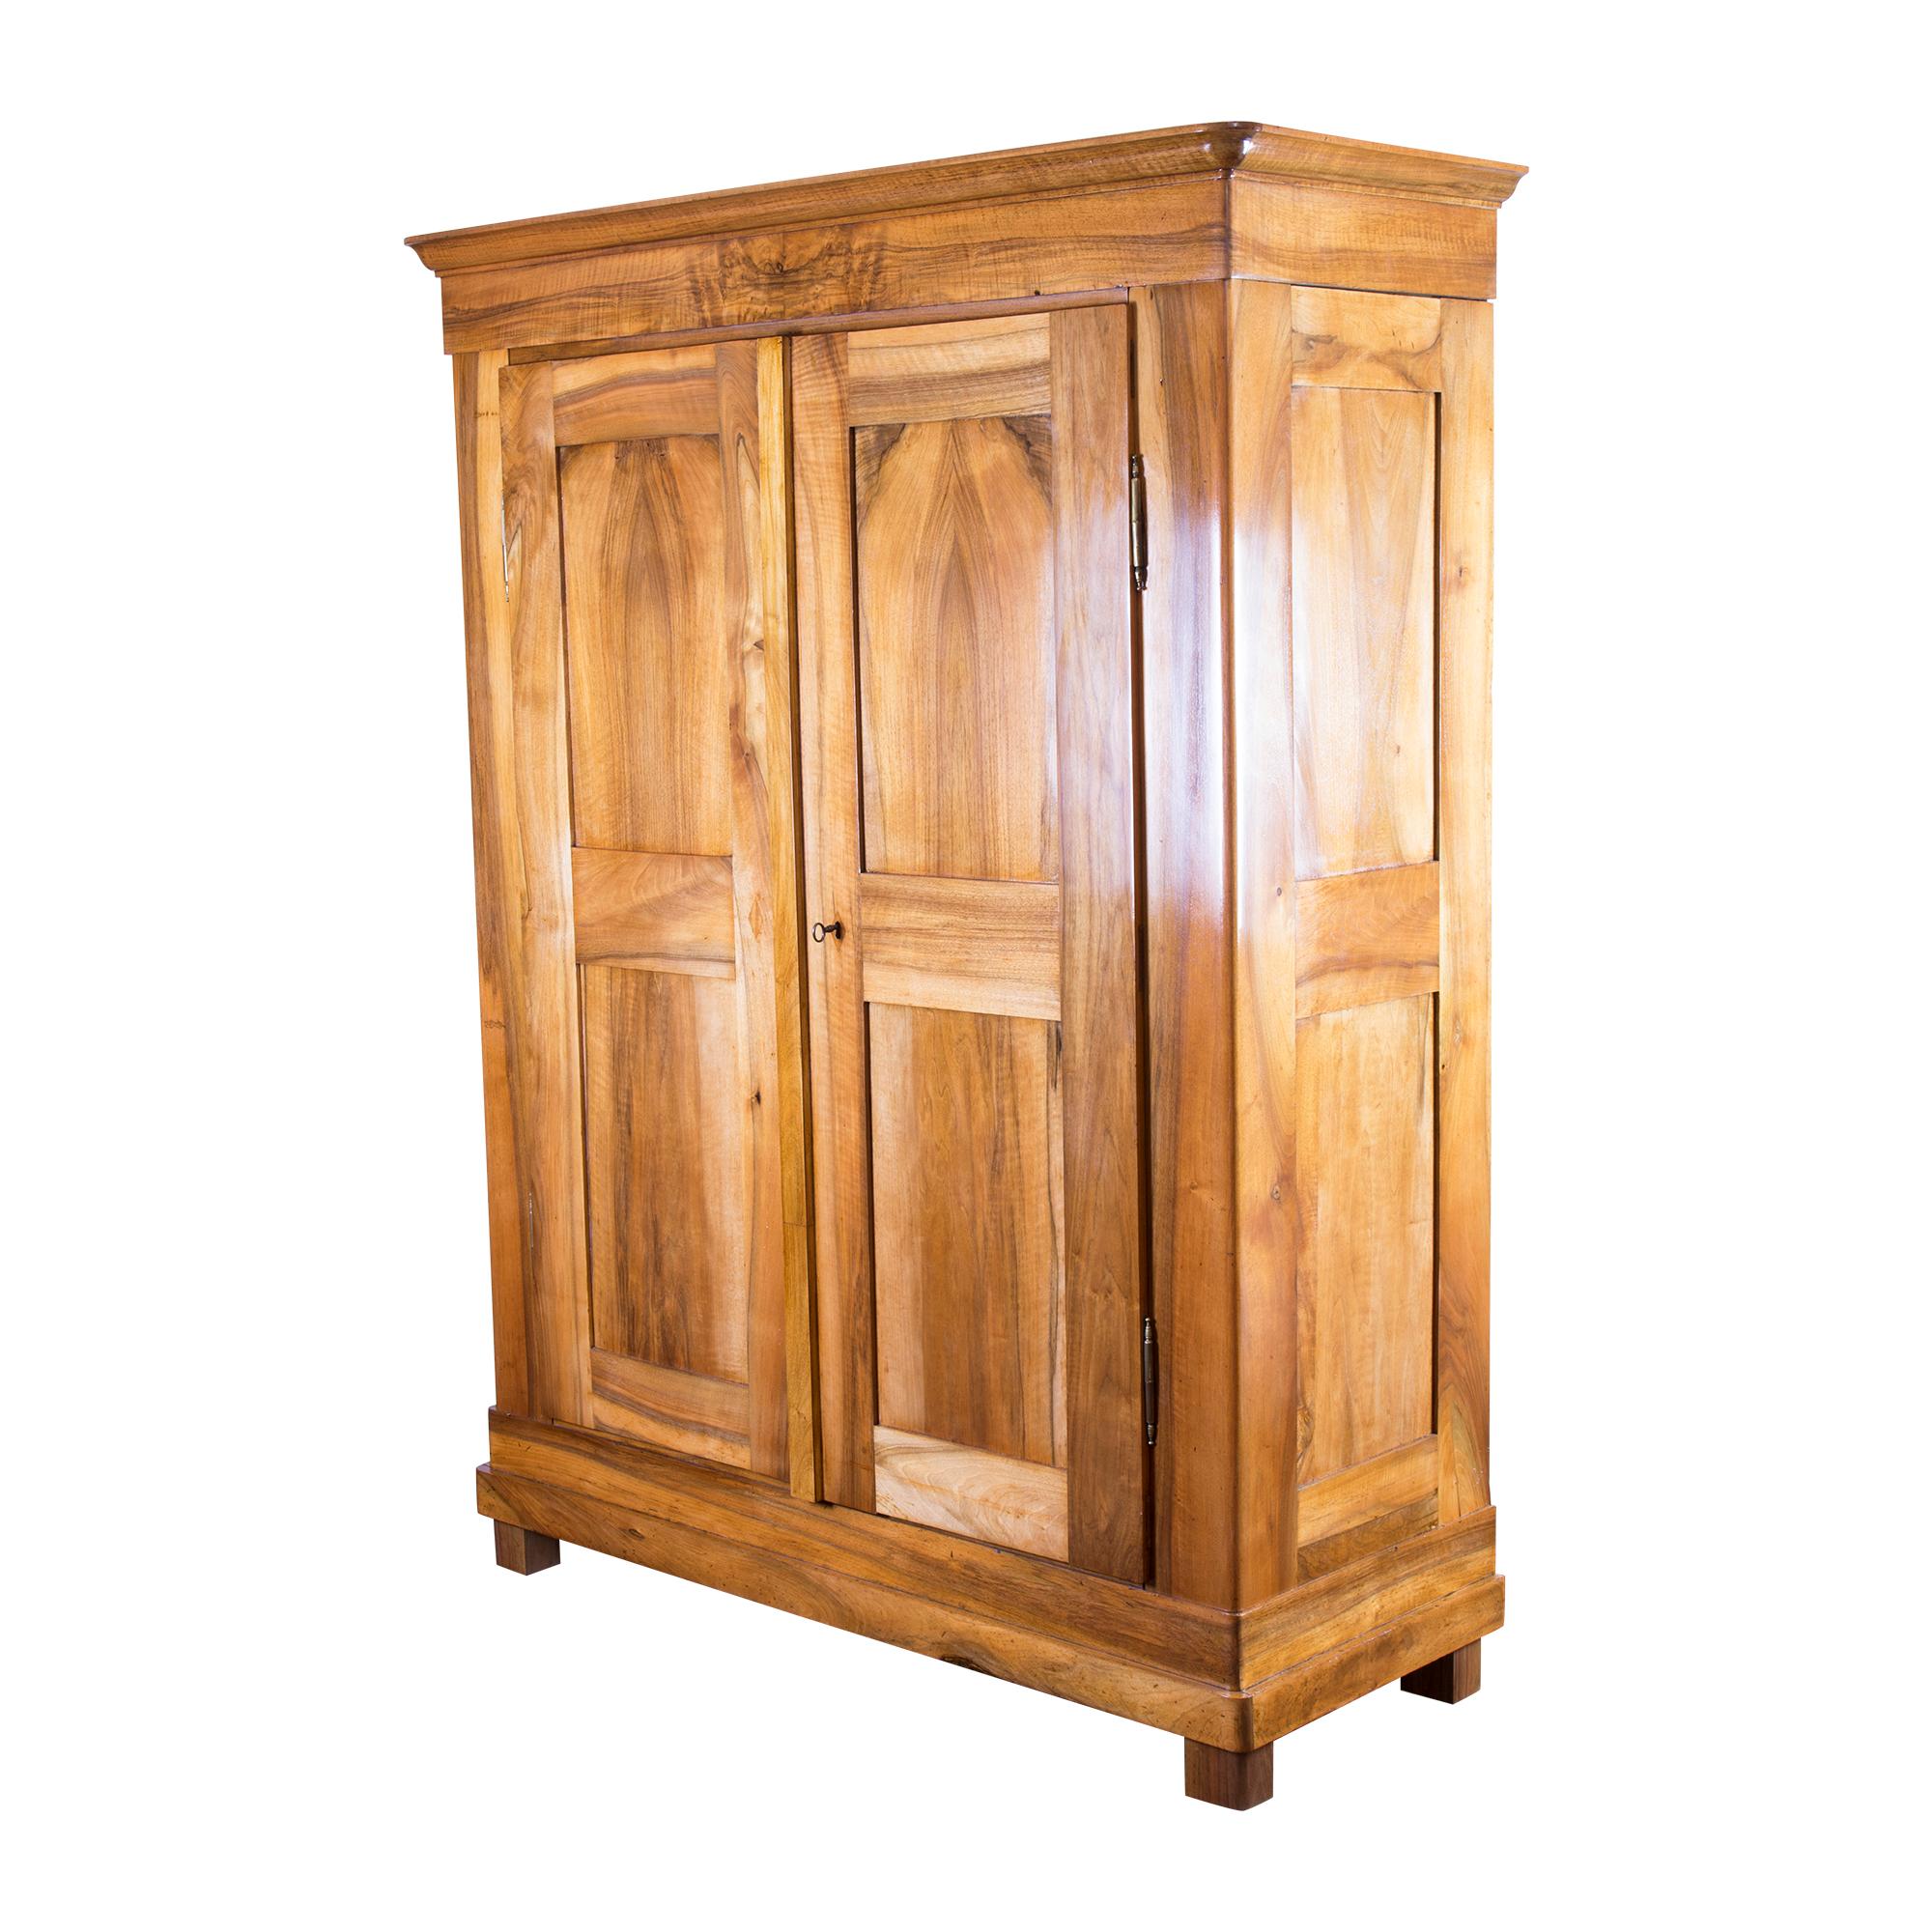 Very nice simple wardrobe from the time of the Biedermeier. Made of solid walnut. The cabinet has very beautiful walnut wood that leaves a great impression. The wardrobe was lovingly restored by us. The backside, bottom and top are made of pinewood